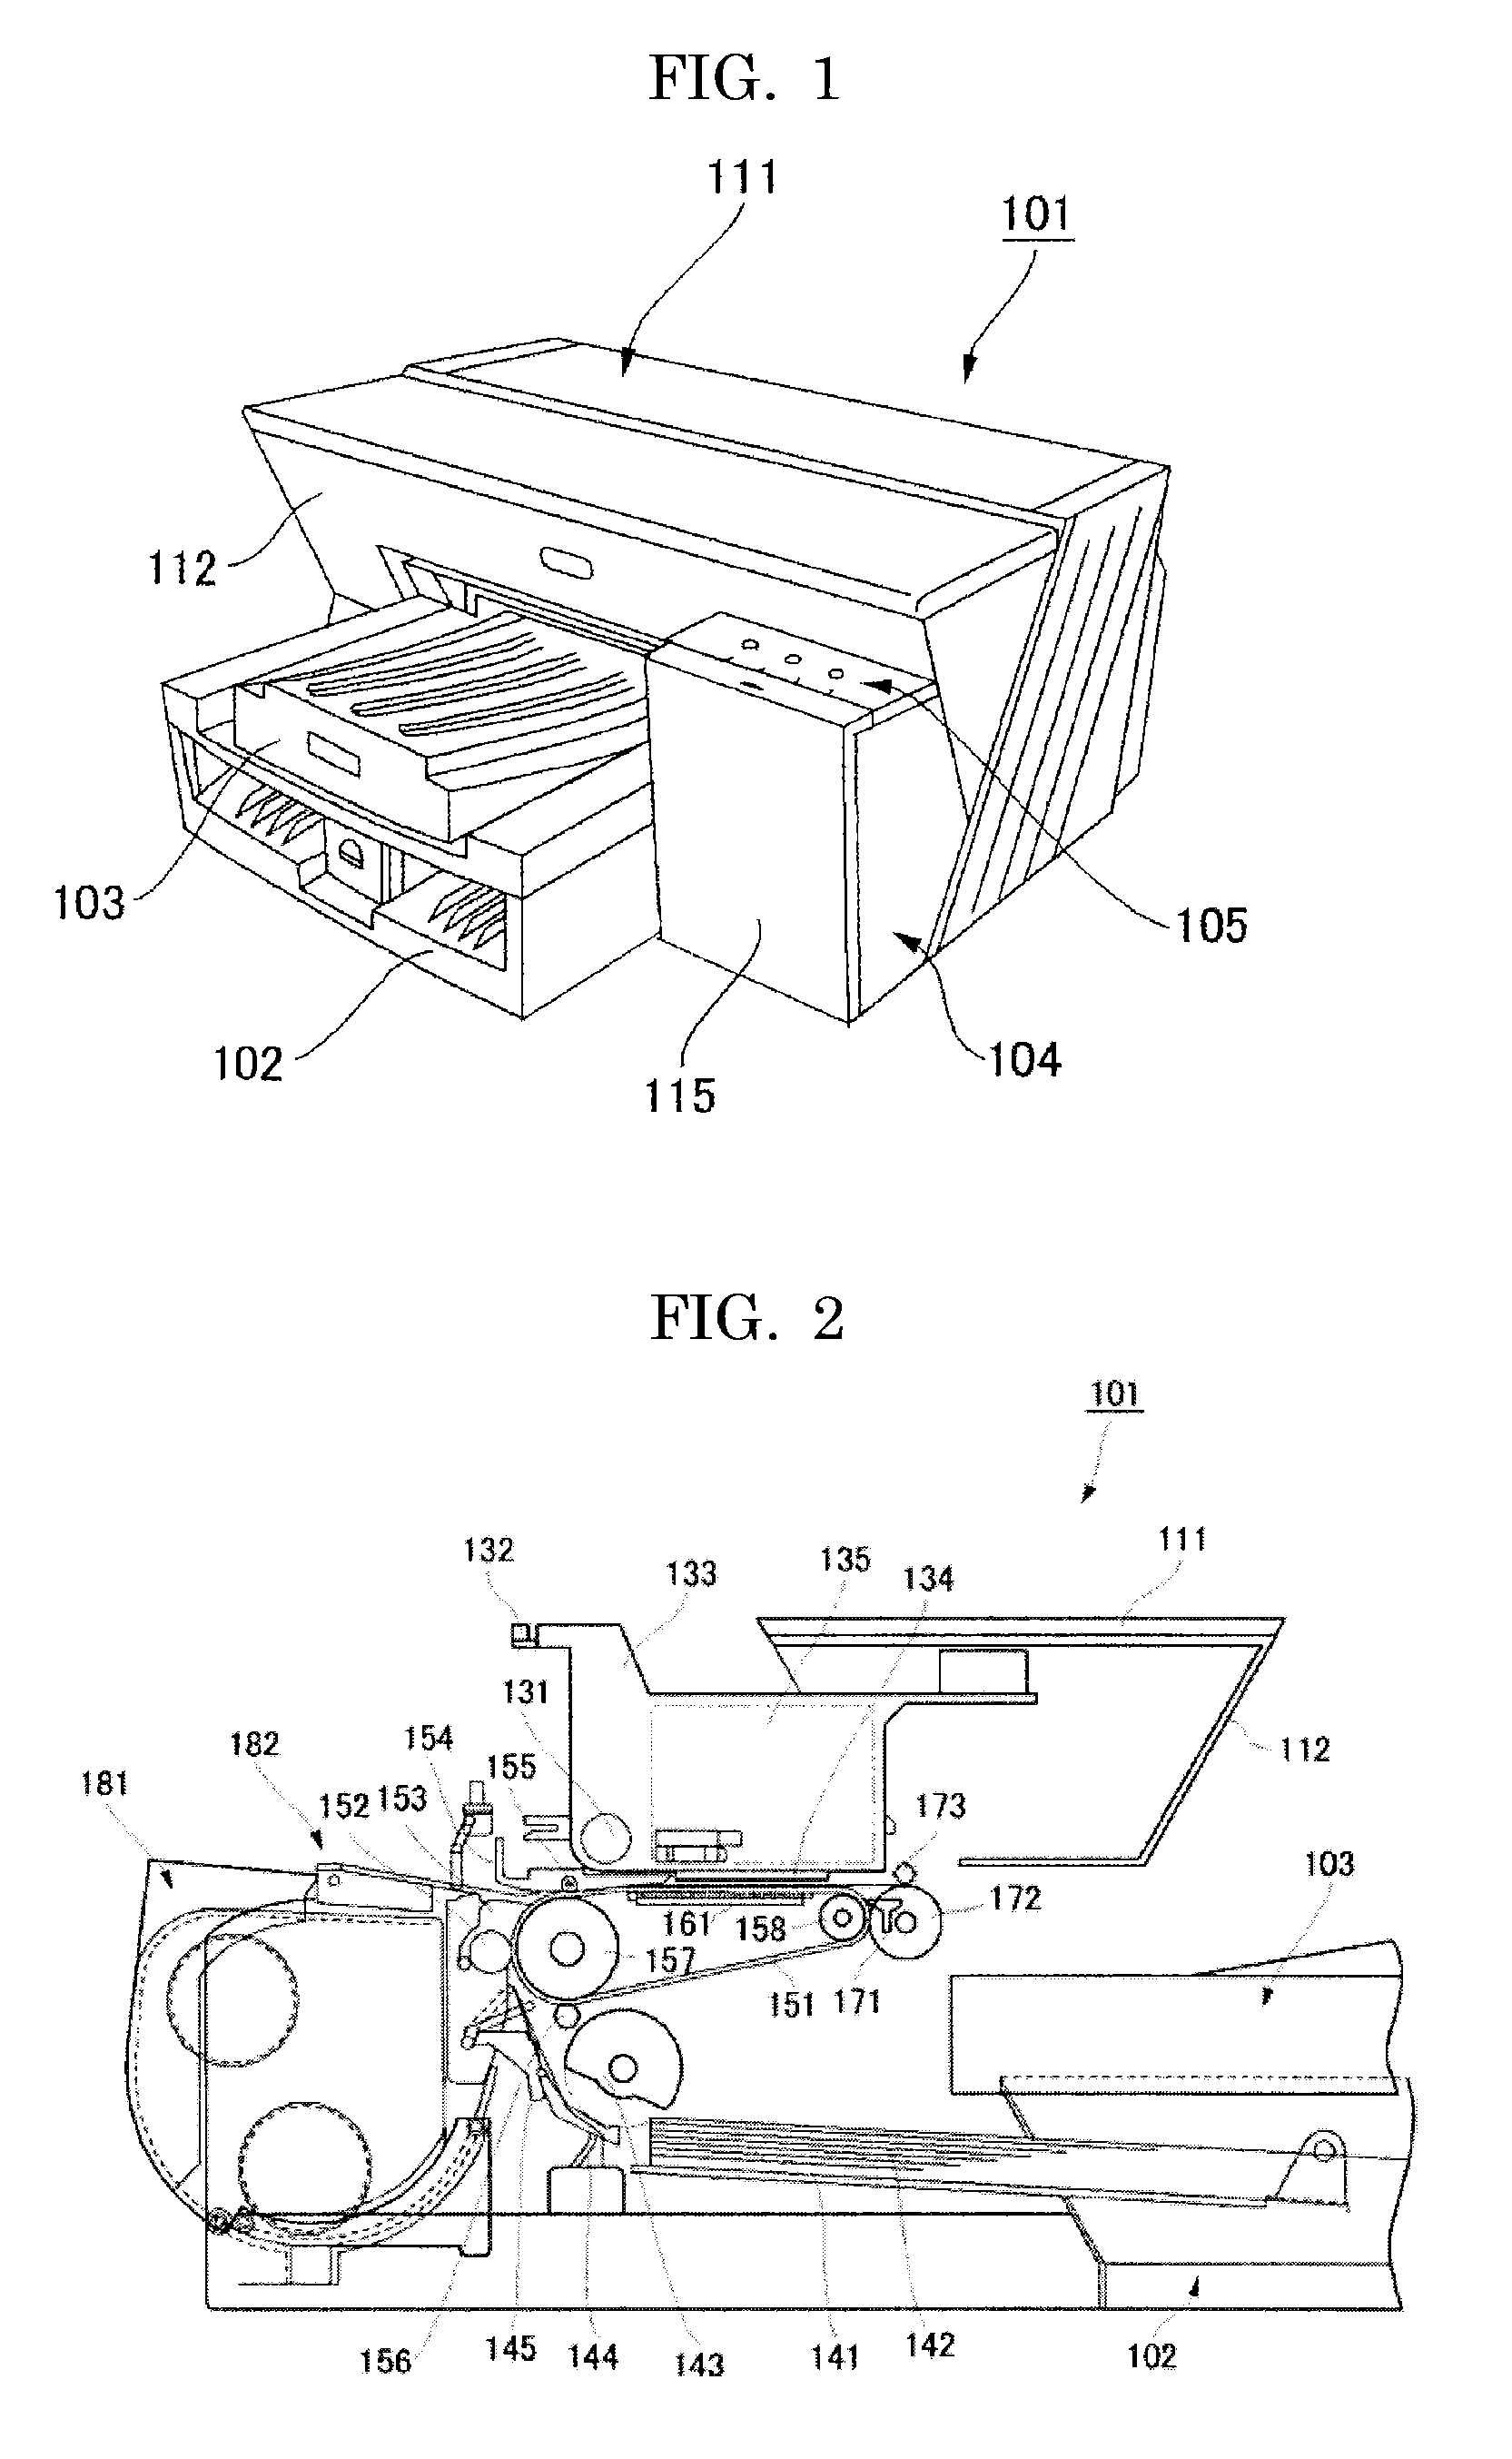 Inkjet recording apparatus, method for inkjet recording, and ink